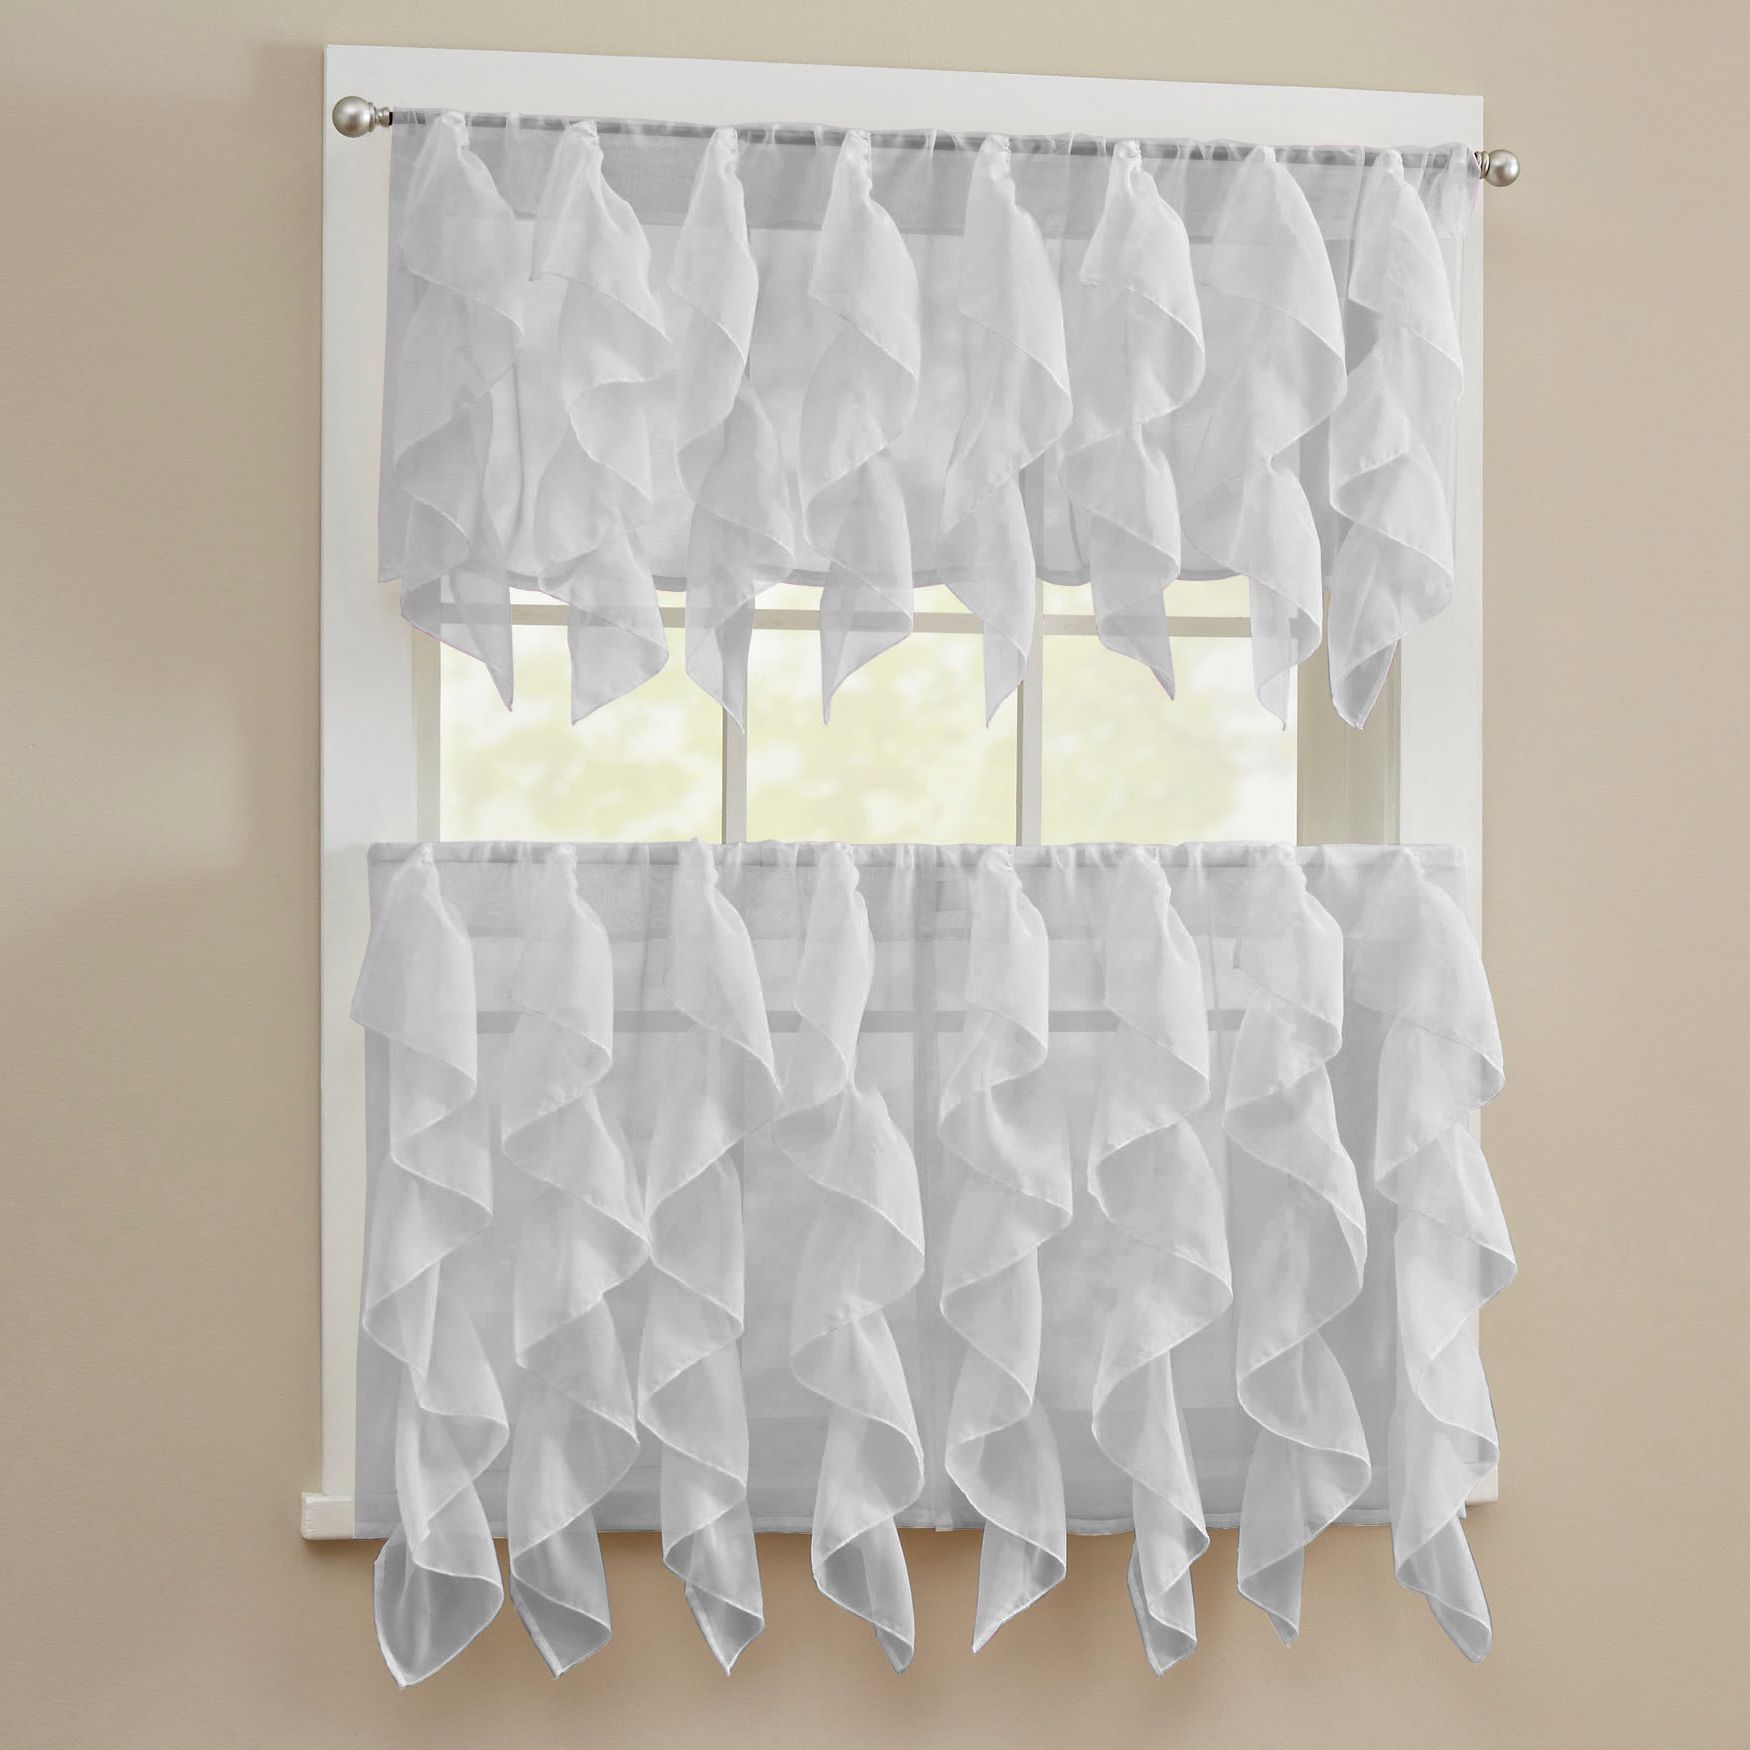 Details About Sheer Voile Vertical Ruffle Window Kitchen Curtain Tiers Or  Valance Silver Intended For Vertical Ruffled Waterfall Valances And Curtain Tiers (View 6 of 20)